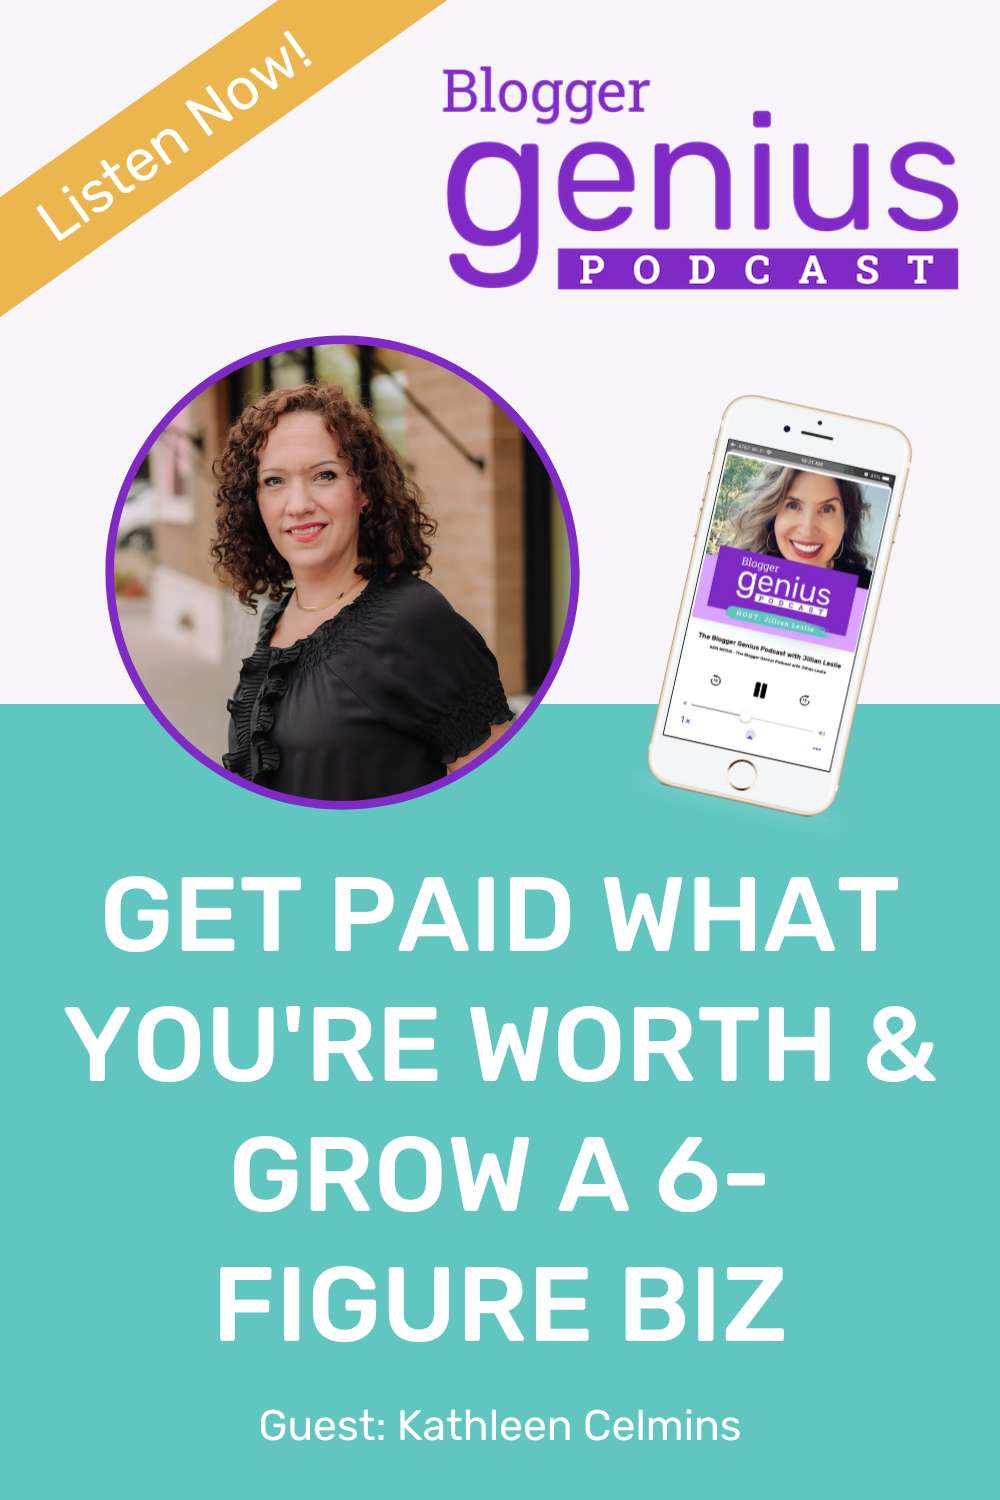 Get Paid What You're Worth and Grow a 6-Figure Biz | The Blogger Genius Podcast with Jillian Leslie